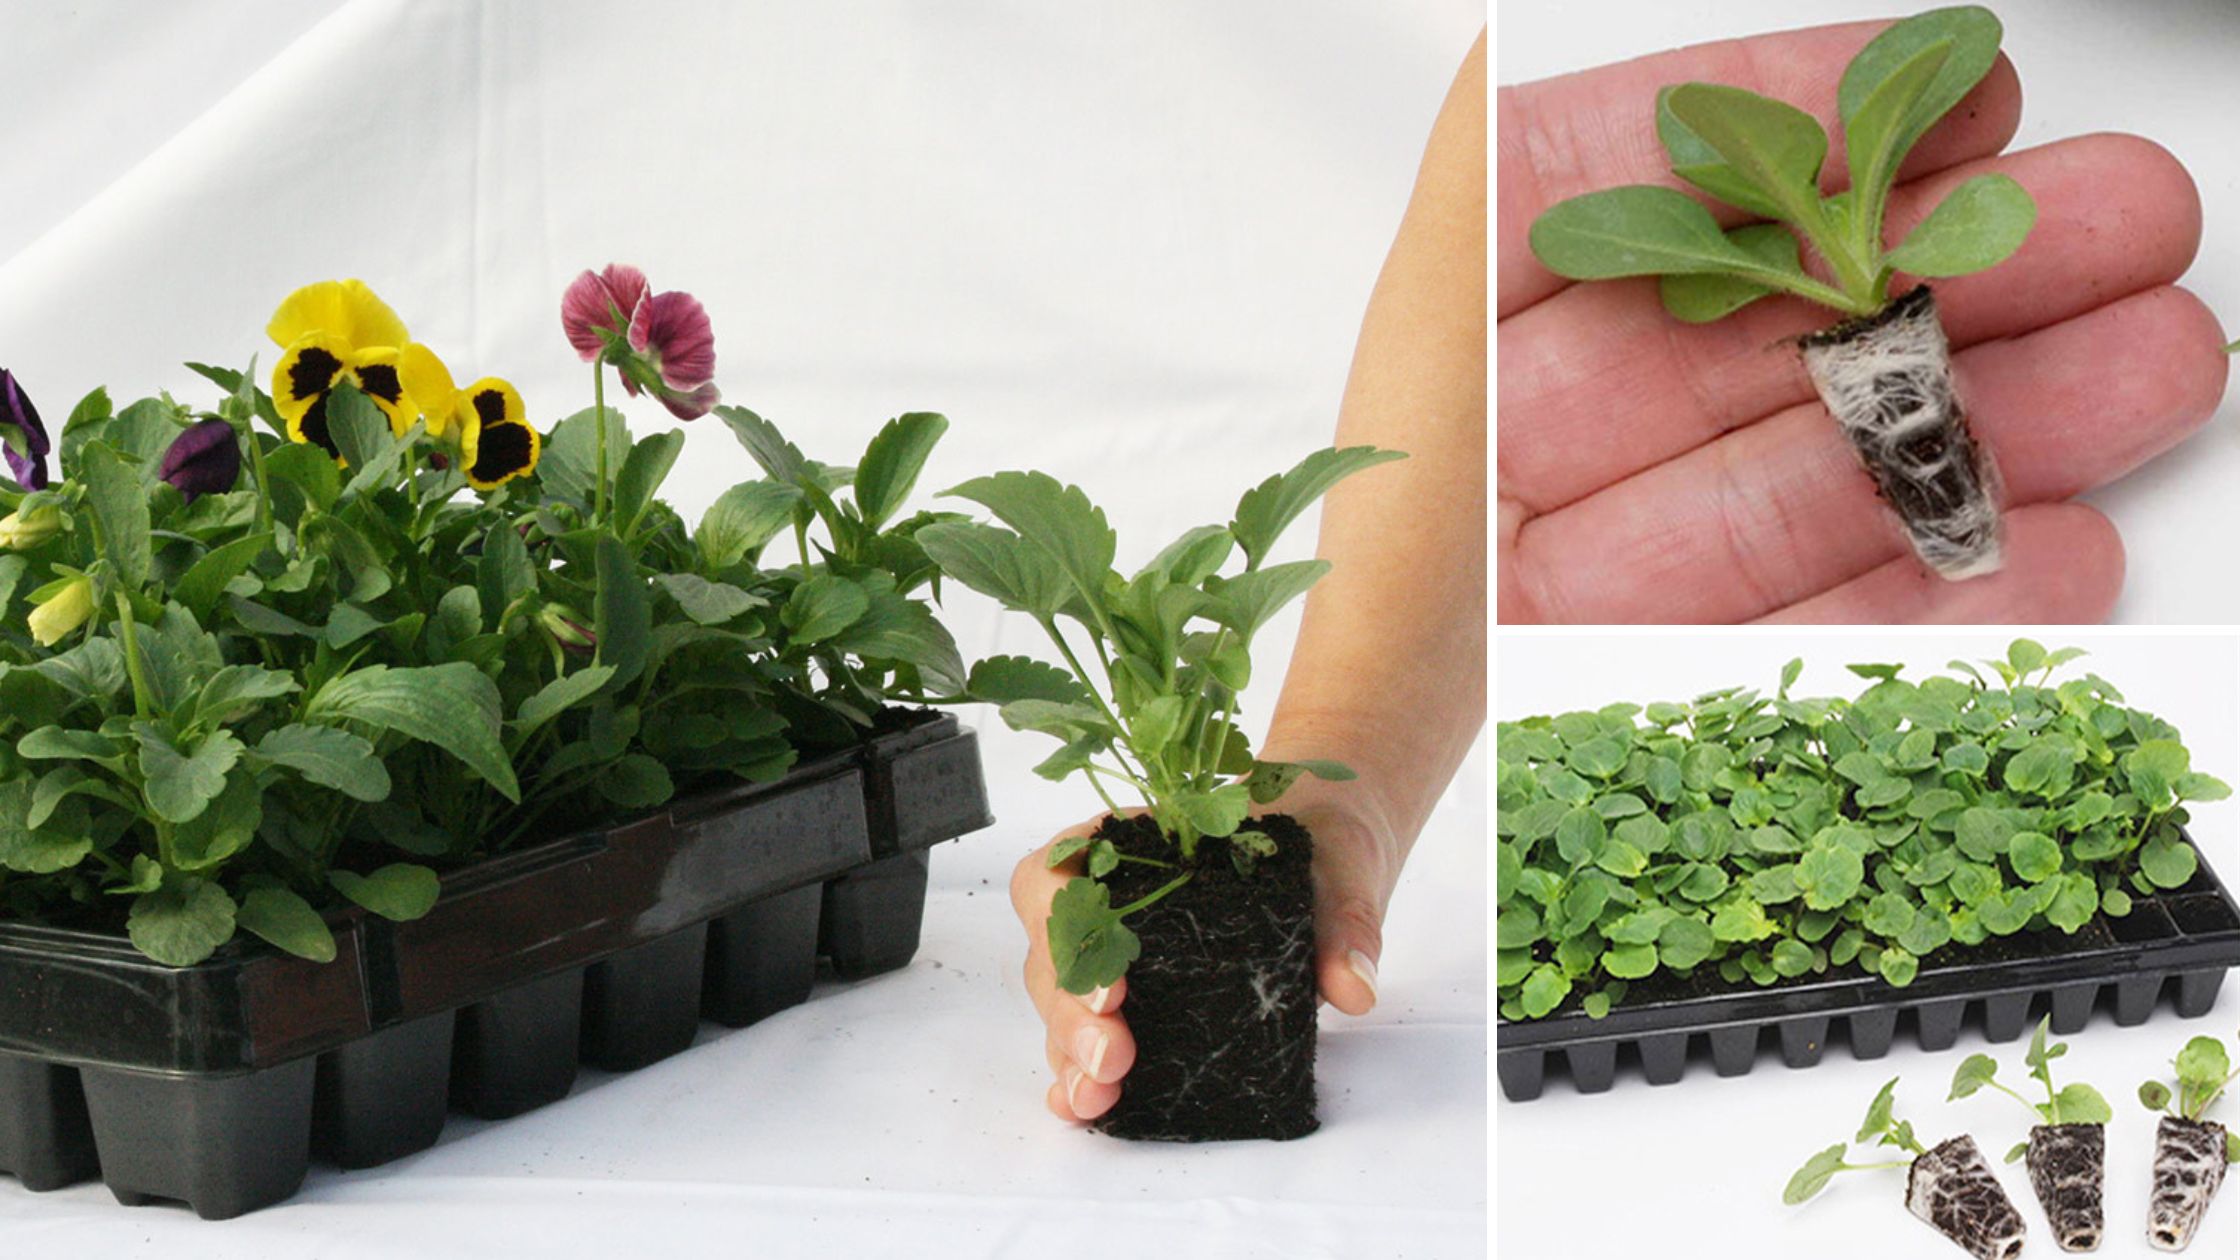 garden ready, rapid, and maxi plug plants in trays